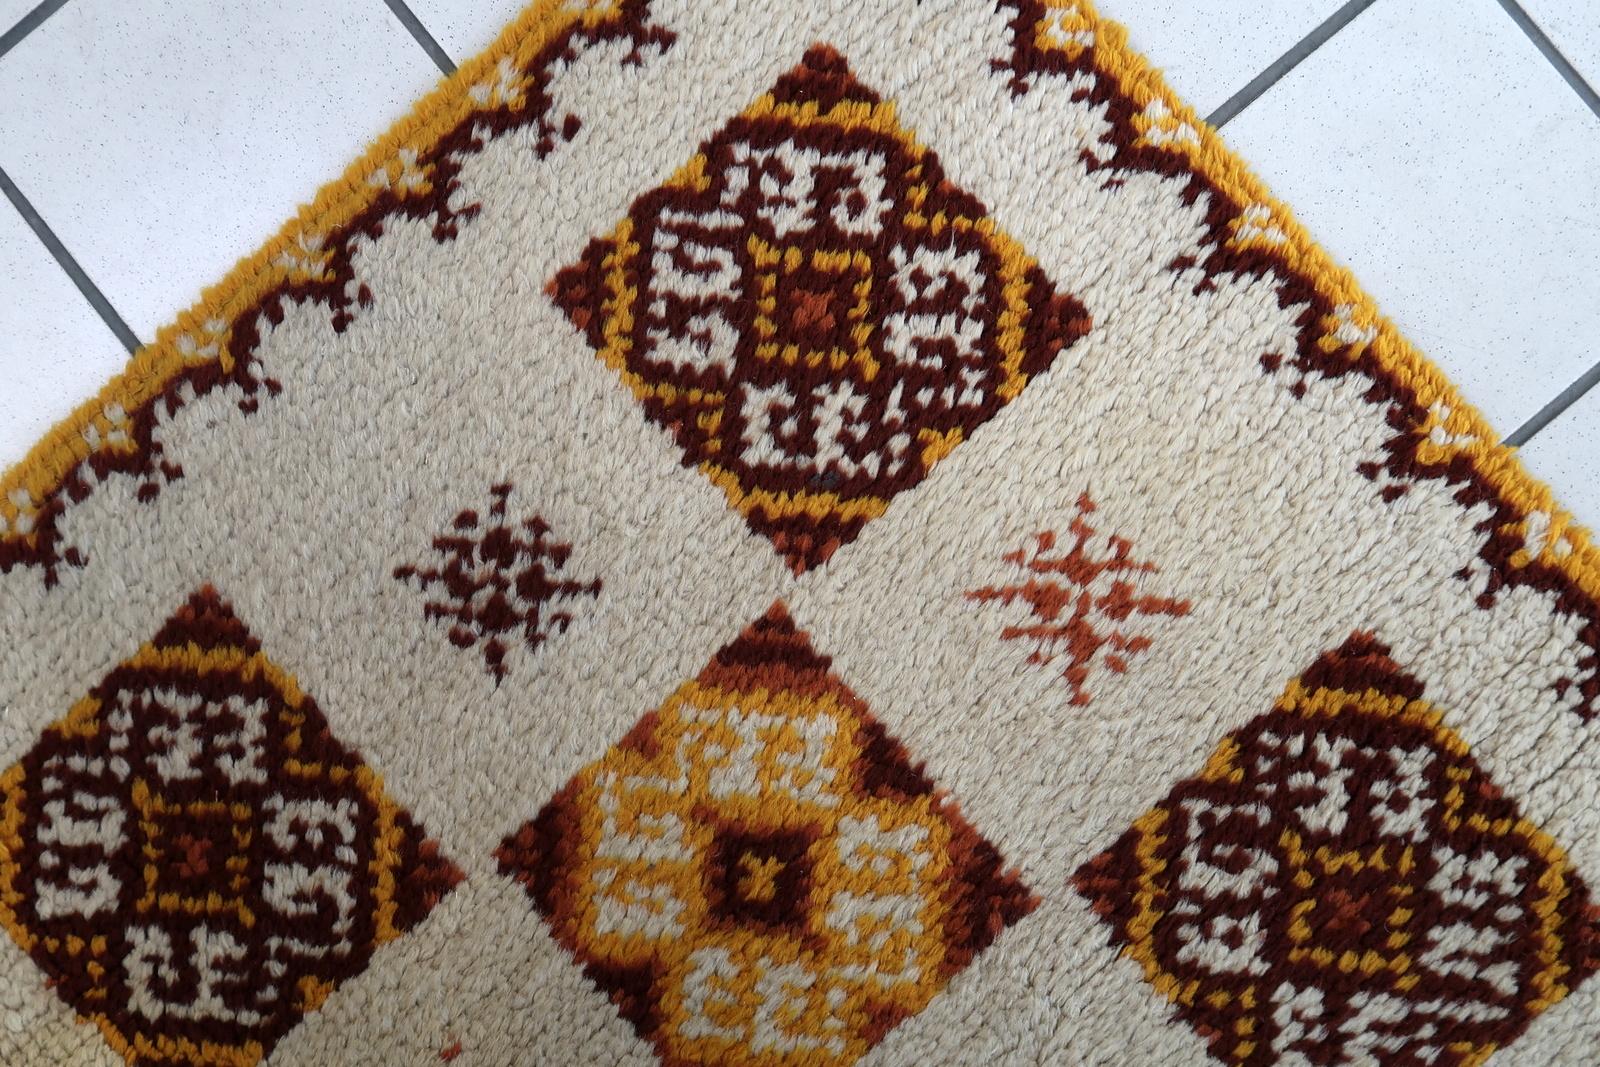 Vintage French Savonnerie rug in beige color. The rug has been made in wool in the end of 20th century. It is in original good condition.

-condition: original good,

-circa: 1960s,

-size: 2.5' x 4.8' (77cm x 146cm),

-material: